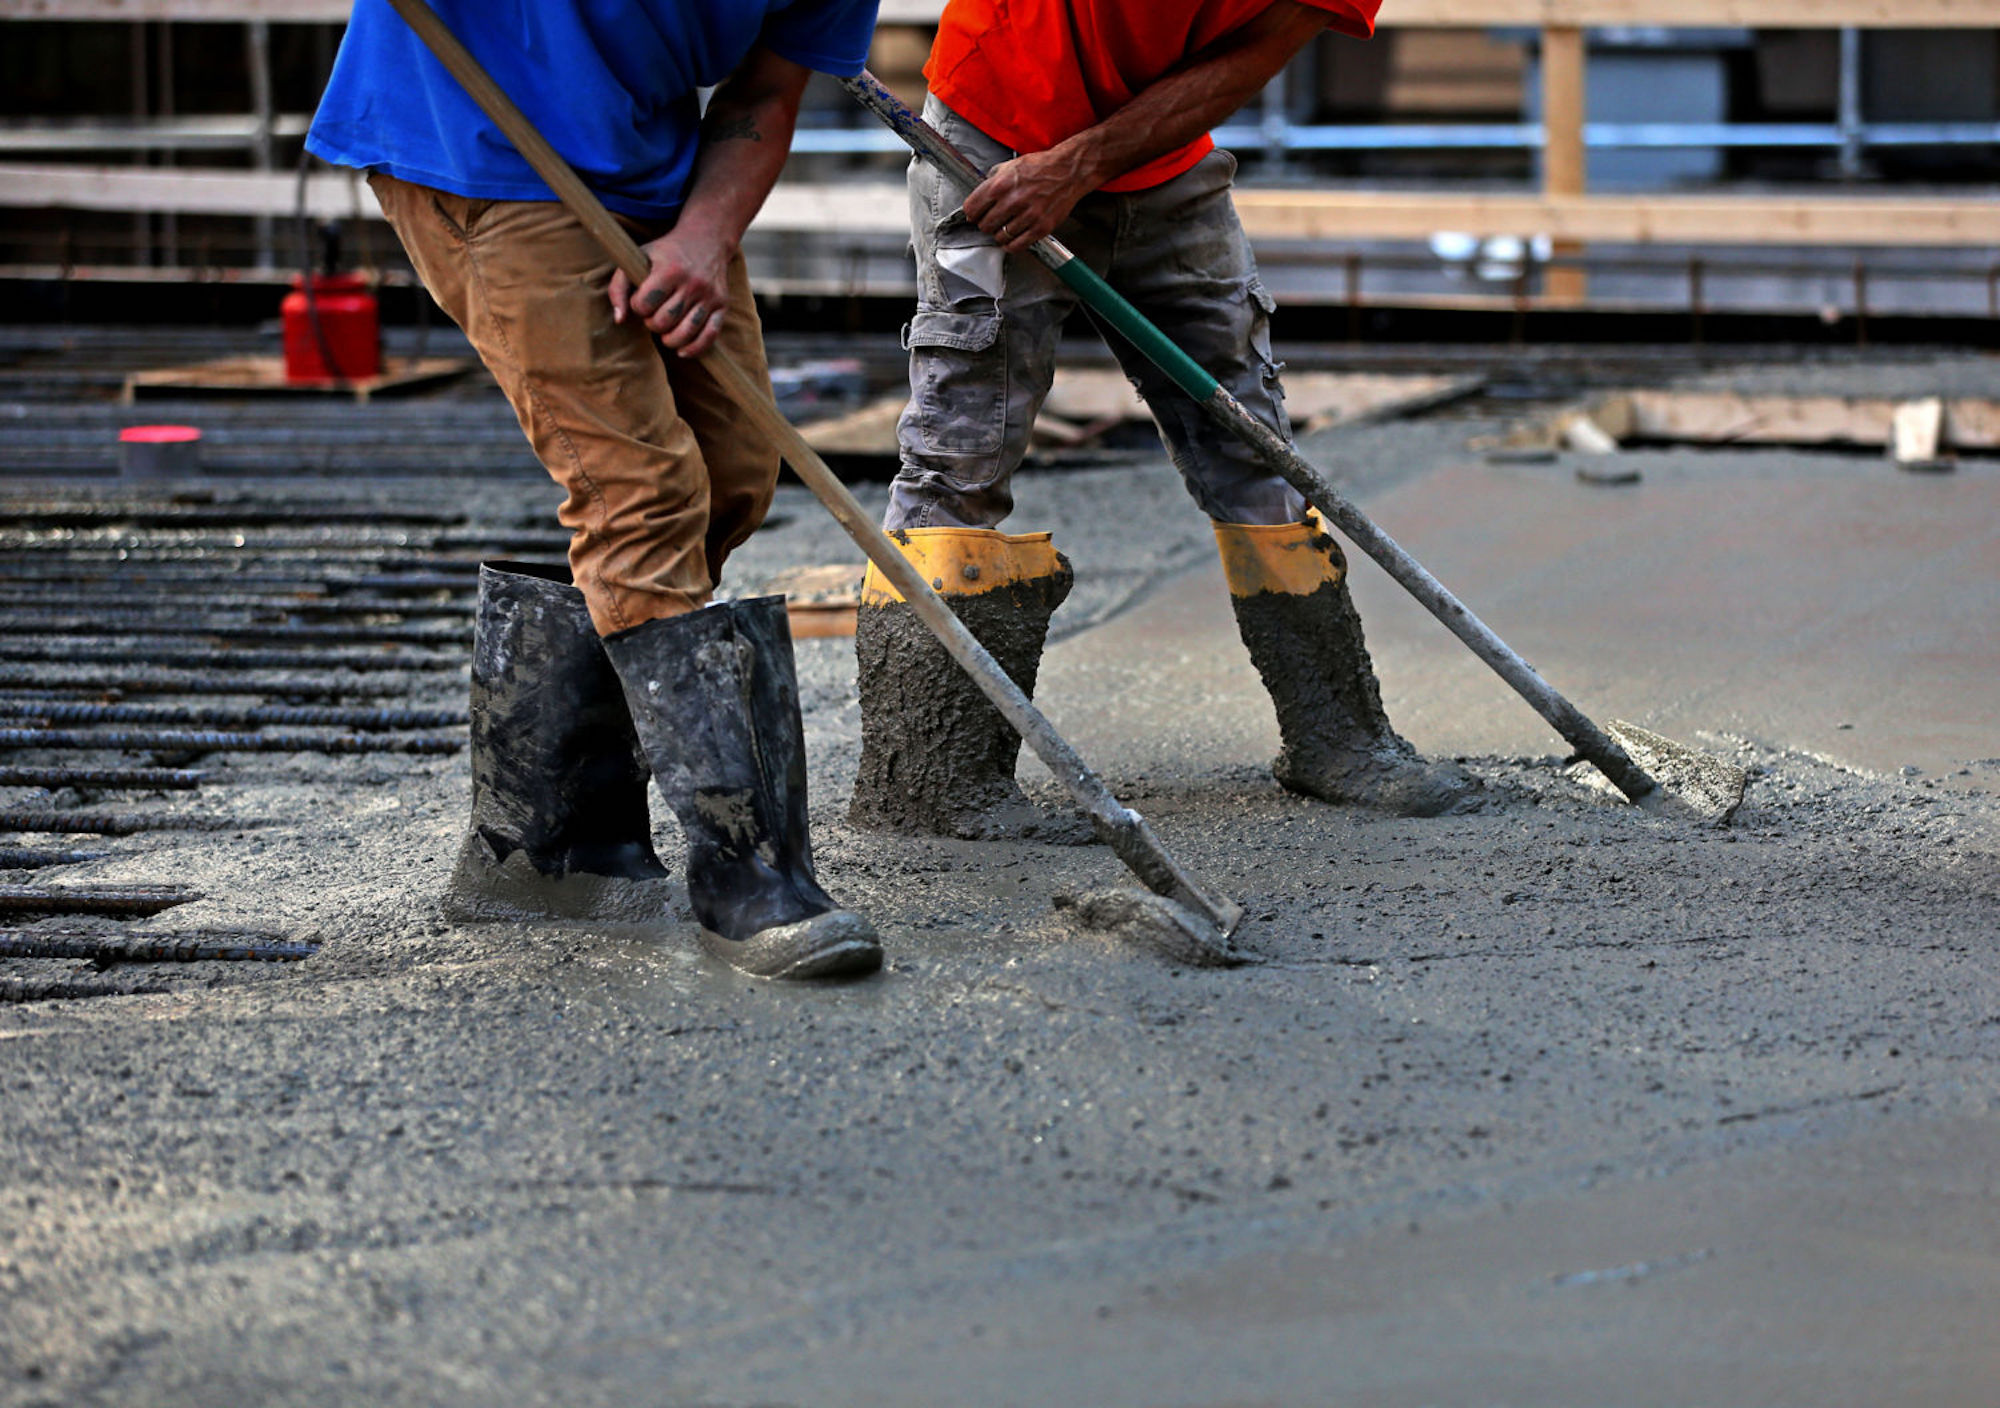 Two men, one wearing a red shirt with grey pants, and the other one a blue shirt and brown plants, use shovels to distribute fresh concrete over a street. They're also wearing construction boots.